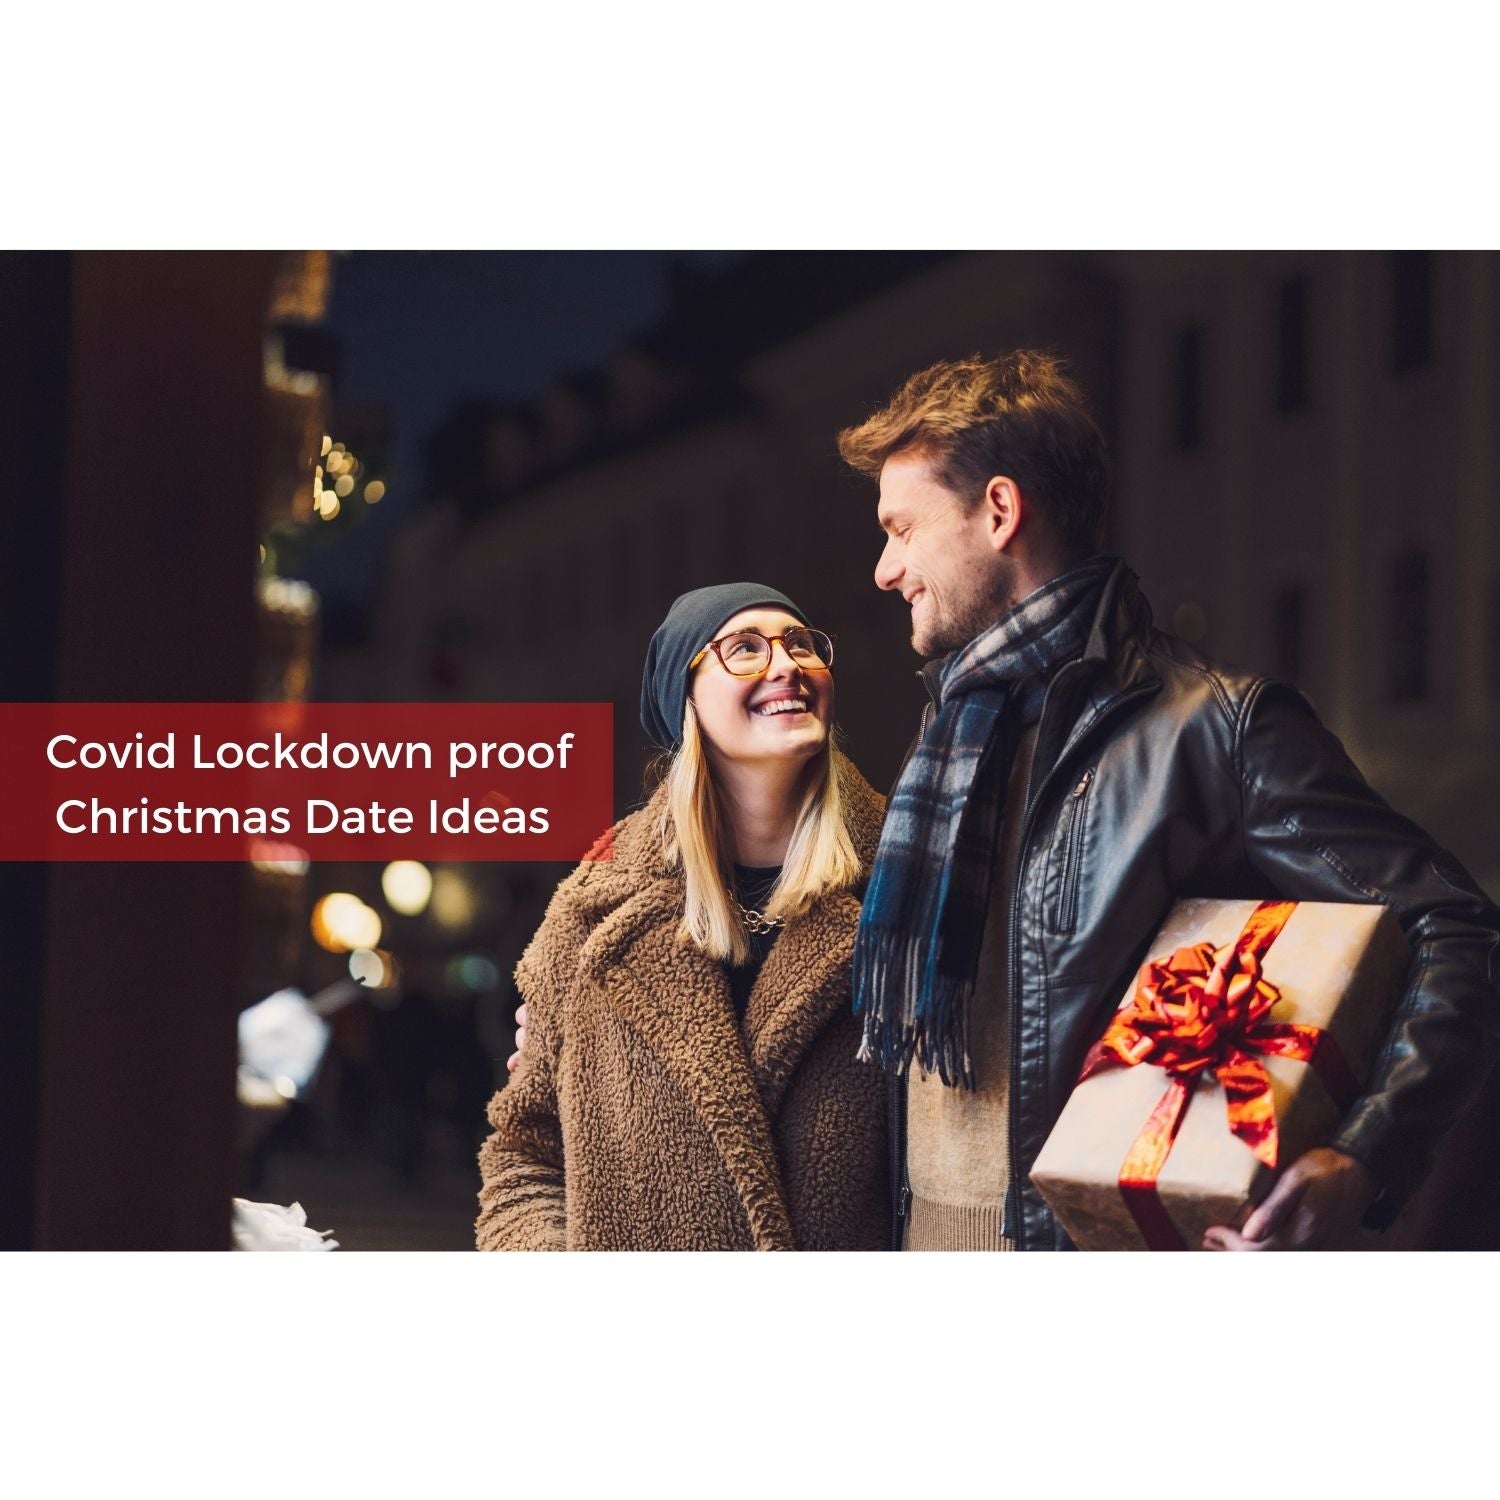 Christmas Date Night Ideas 2020 – How to have a COVID-proof date night with your special someone